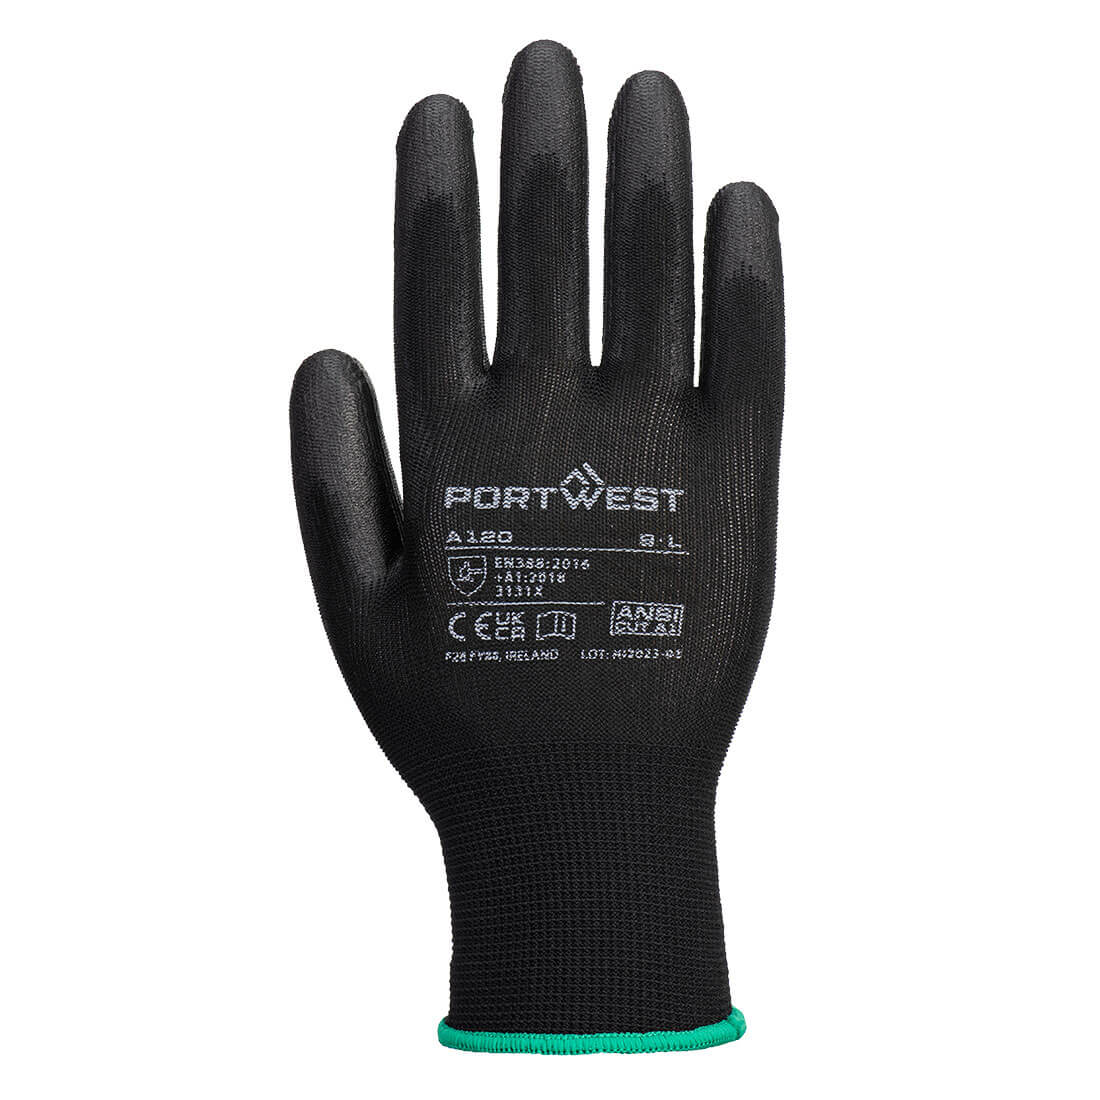 Portwest PU Palm Coated Safety Gloves Gardening Outdoor Builders Work Wear A121 